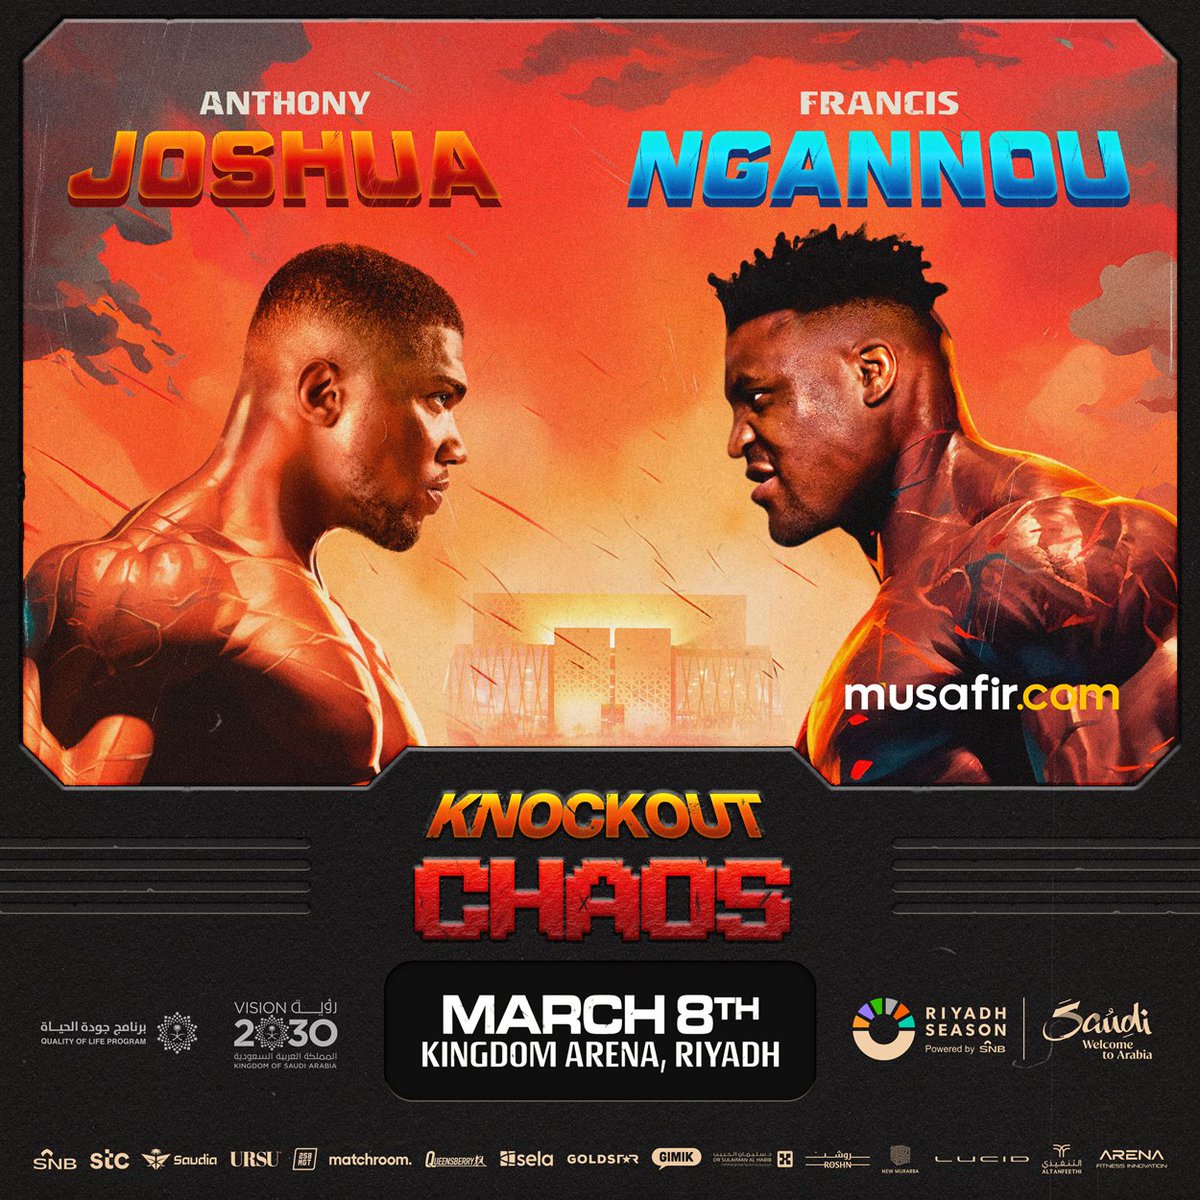 Witness the thrilling knockout match between the heavyweights of the boxing world So, get your game face on 😏🥊 ...and your tickets and itinerary from holidays@musafir.com or message us on 97150 800 5050 #musafirdotcom #IamMusafir #KnockoutChaos #Riyadh #KSA